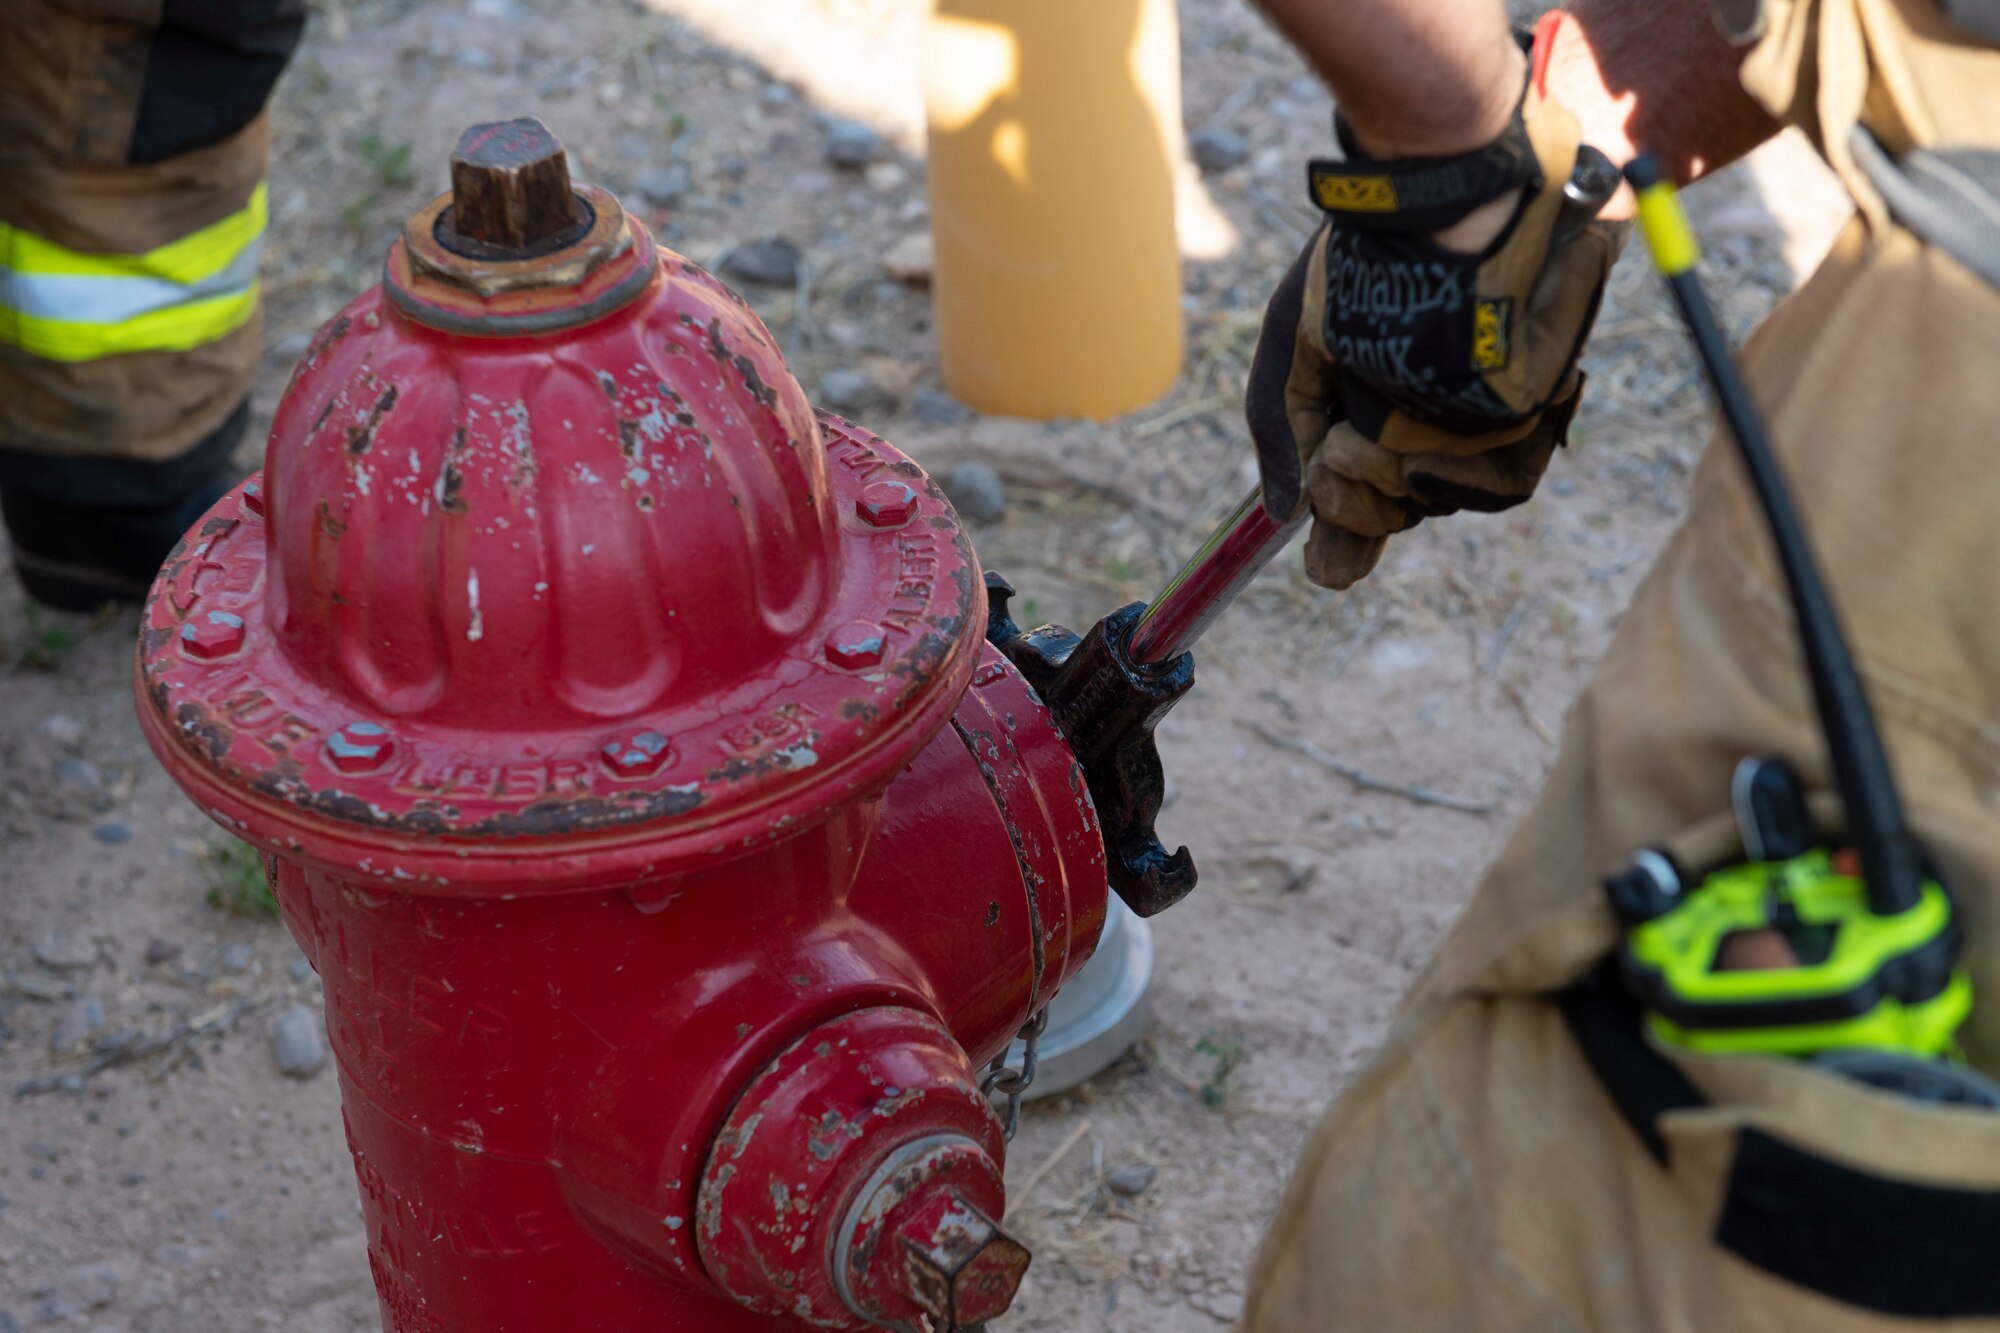 An Airman from the 49th Civil Engineer Squadron secures a fire hydrant during an emergency response training exercise, May 19, 2022, on Holloman Air Force Base, New Mexico.